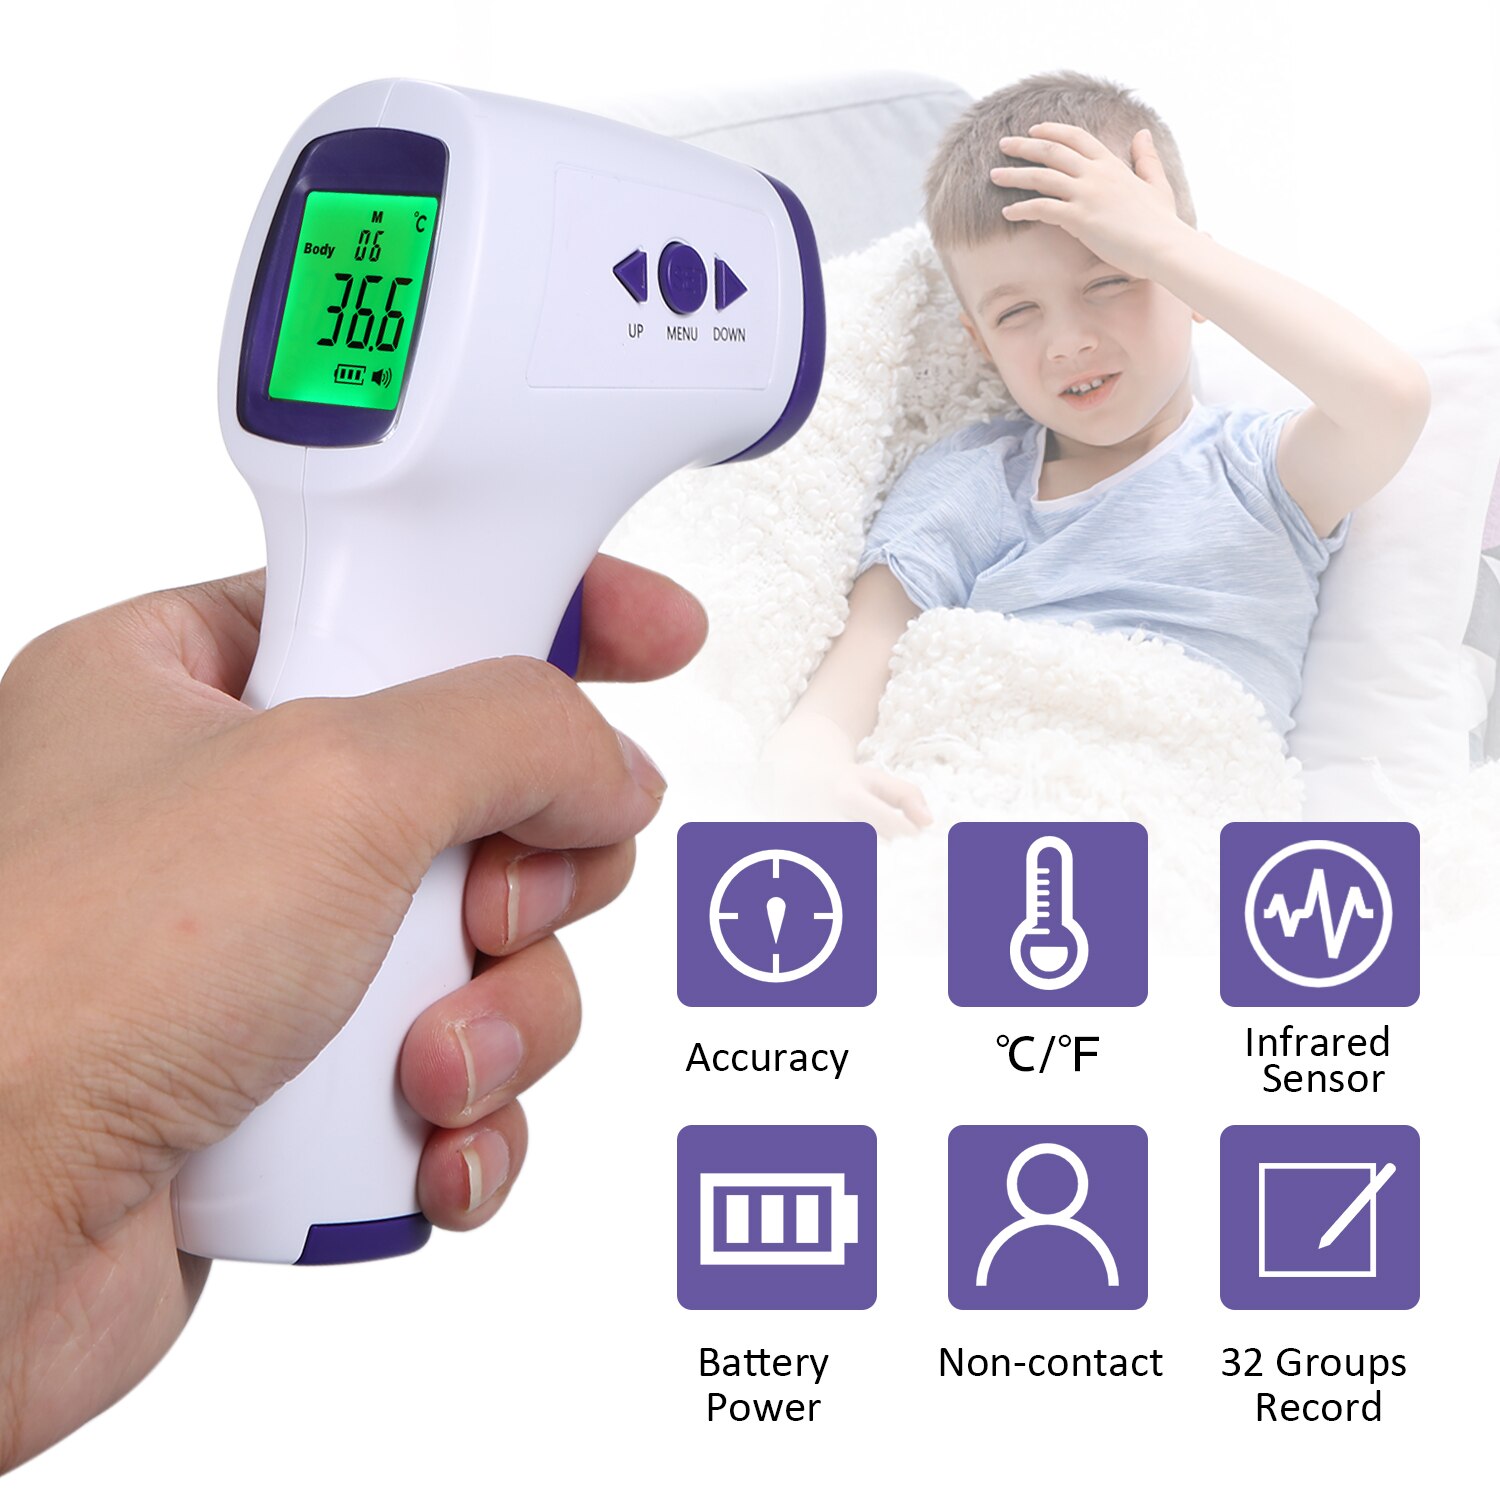 Infrarood Thermometer Non-contact Ir Infrarood Sensor Voorhoofd Body/Object Thermometer Temperatuurmeting Lcd Digitale Display